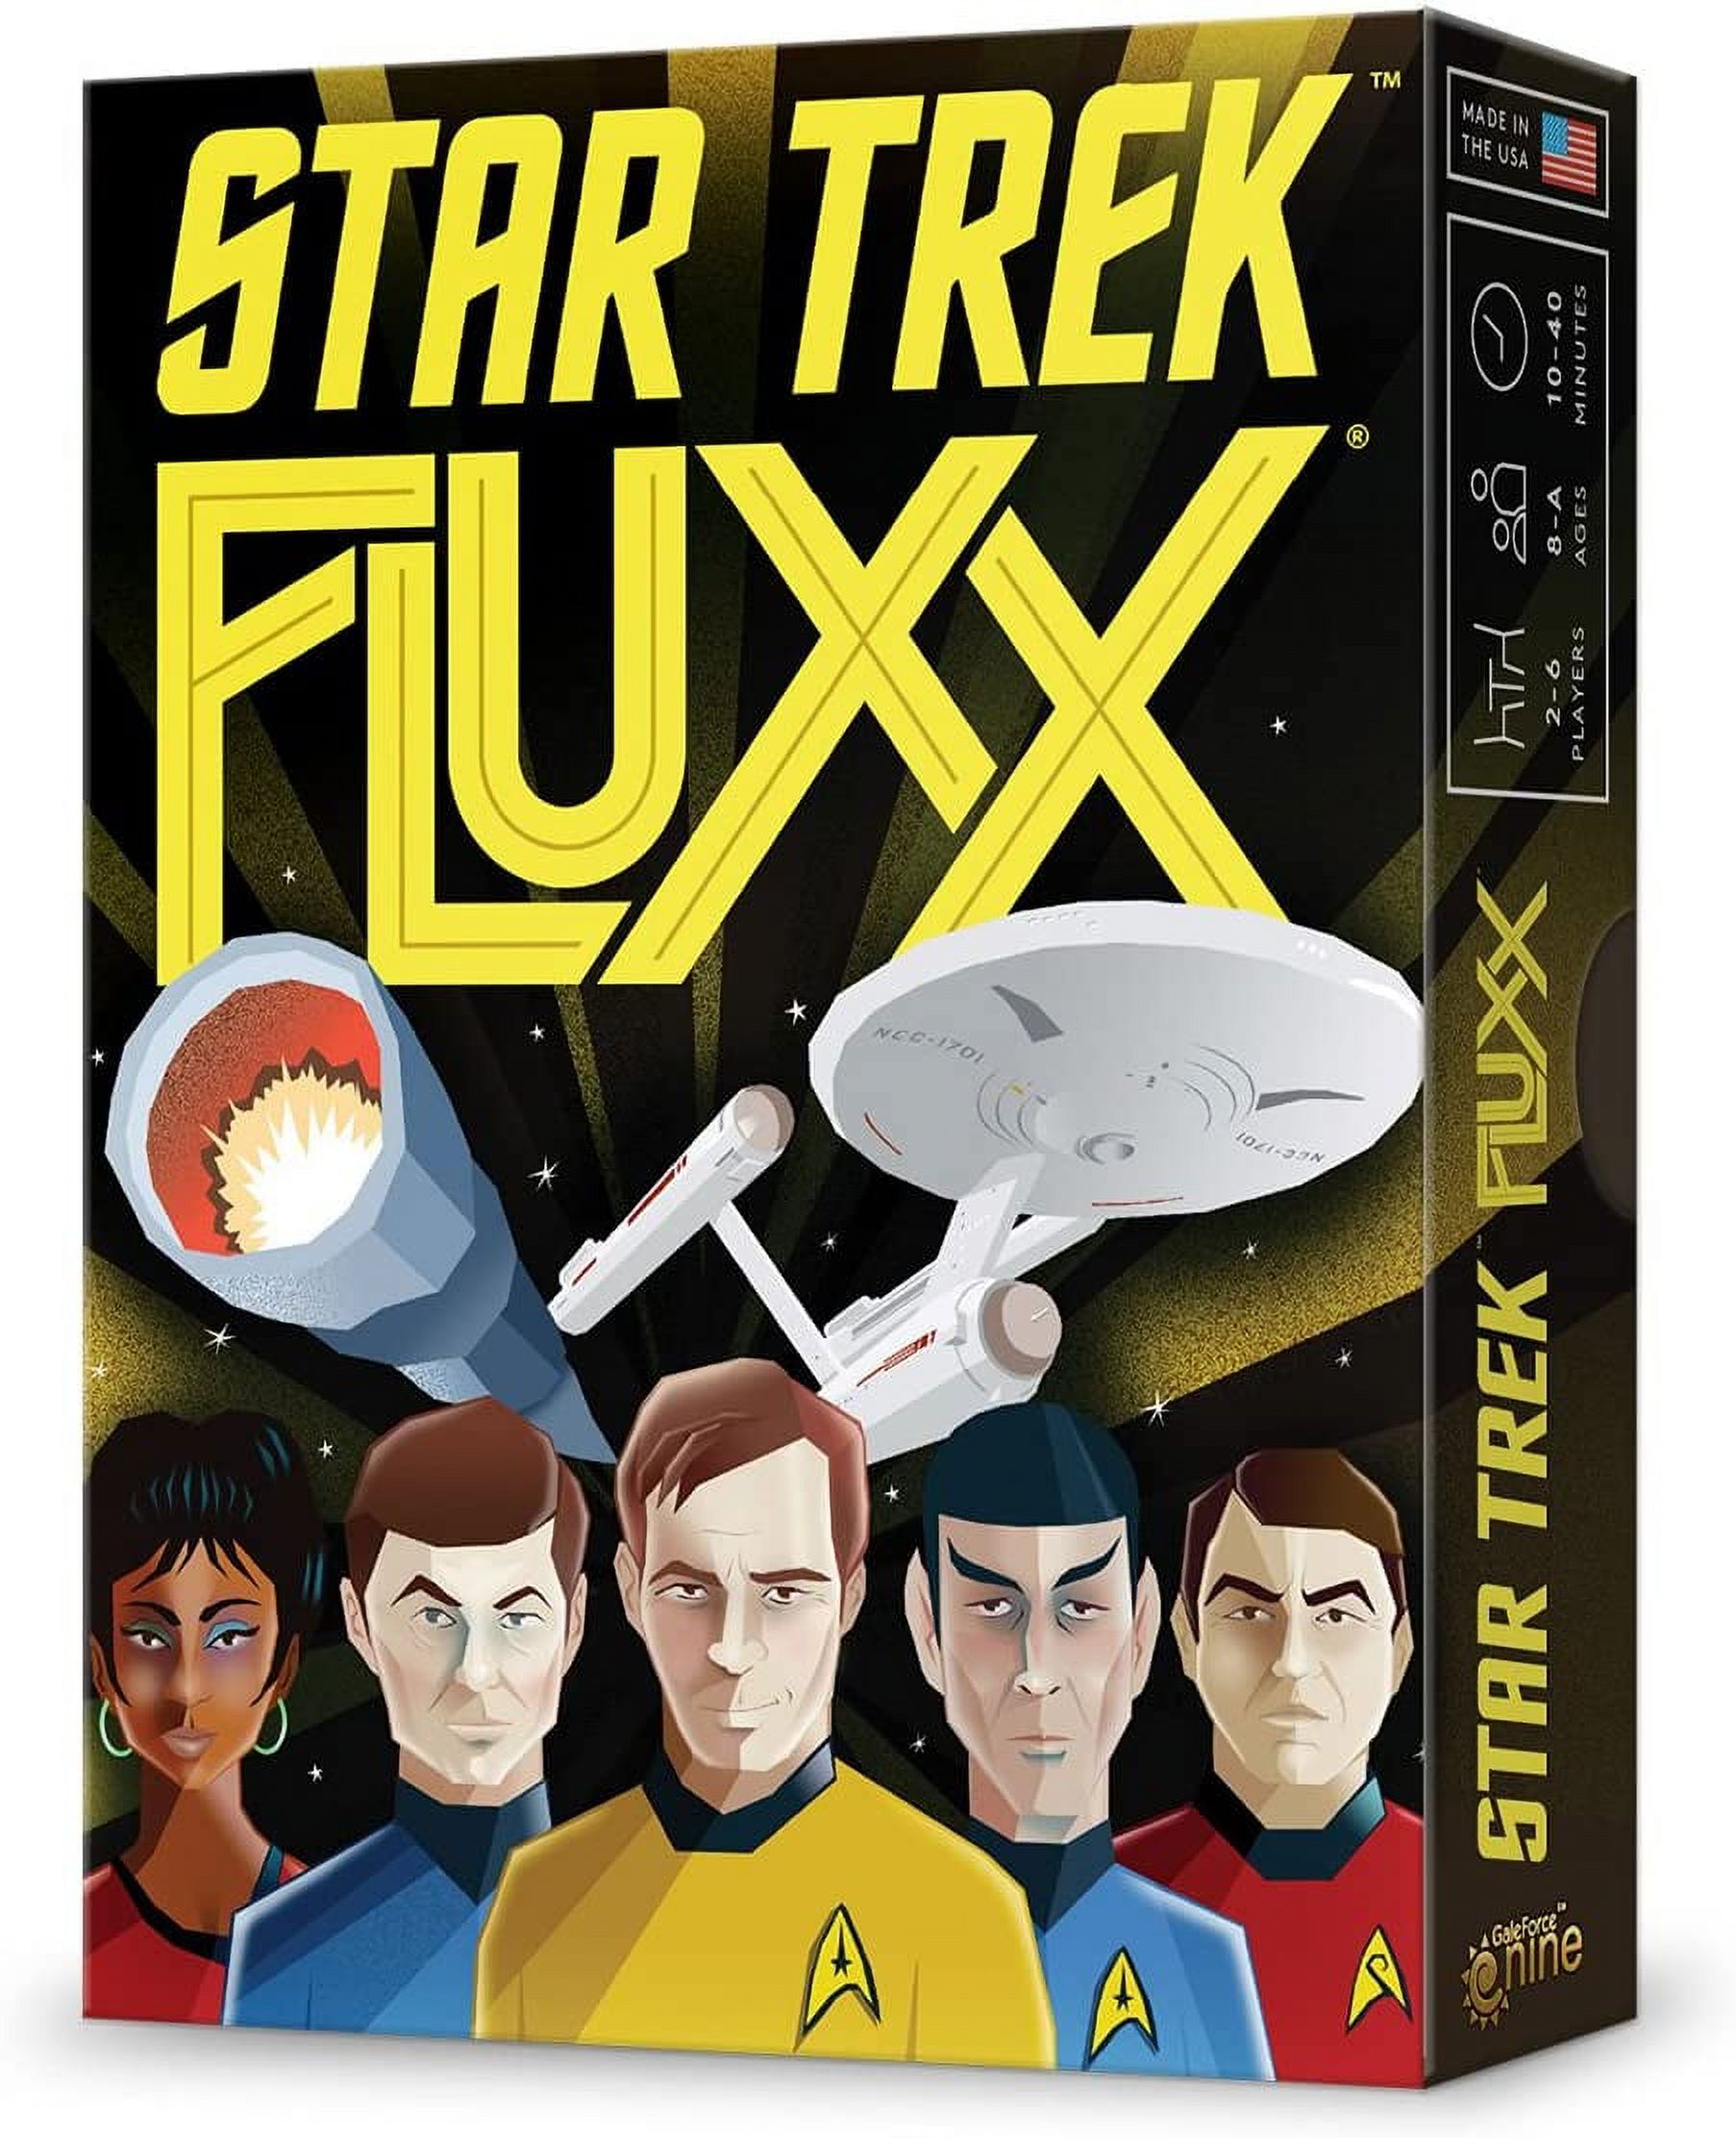 Star Trek Fluxx Card Game offered by Publisher Services - image 5 of 5